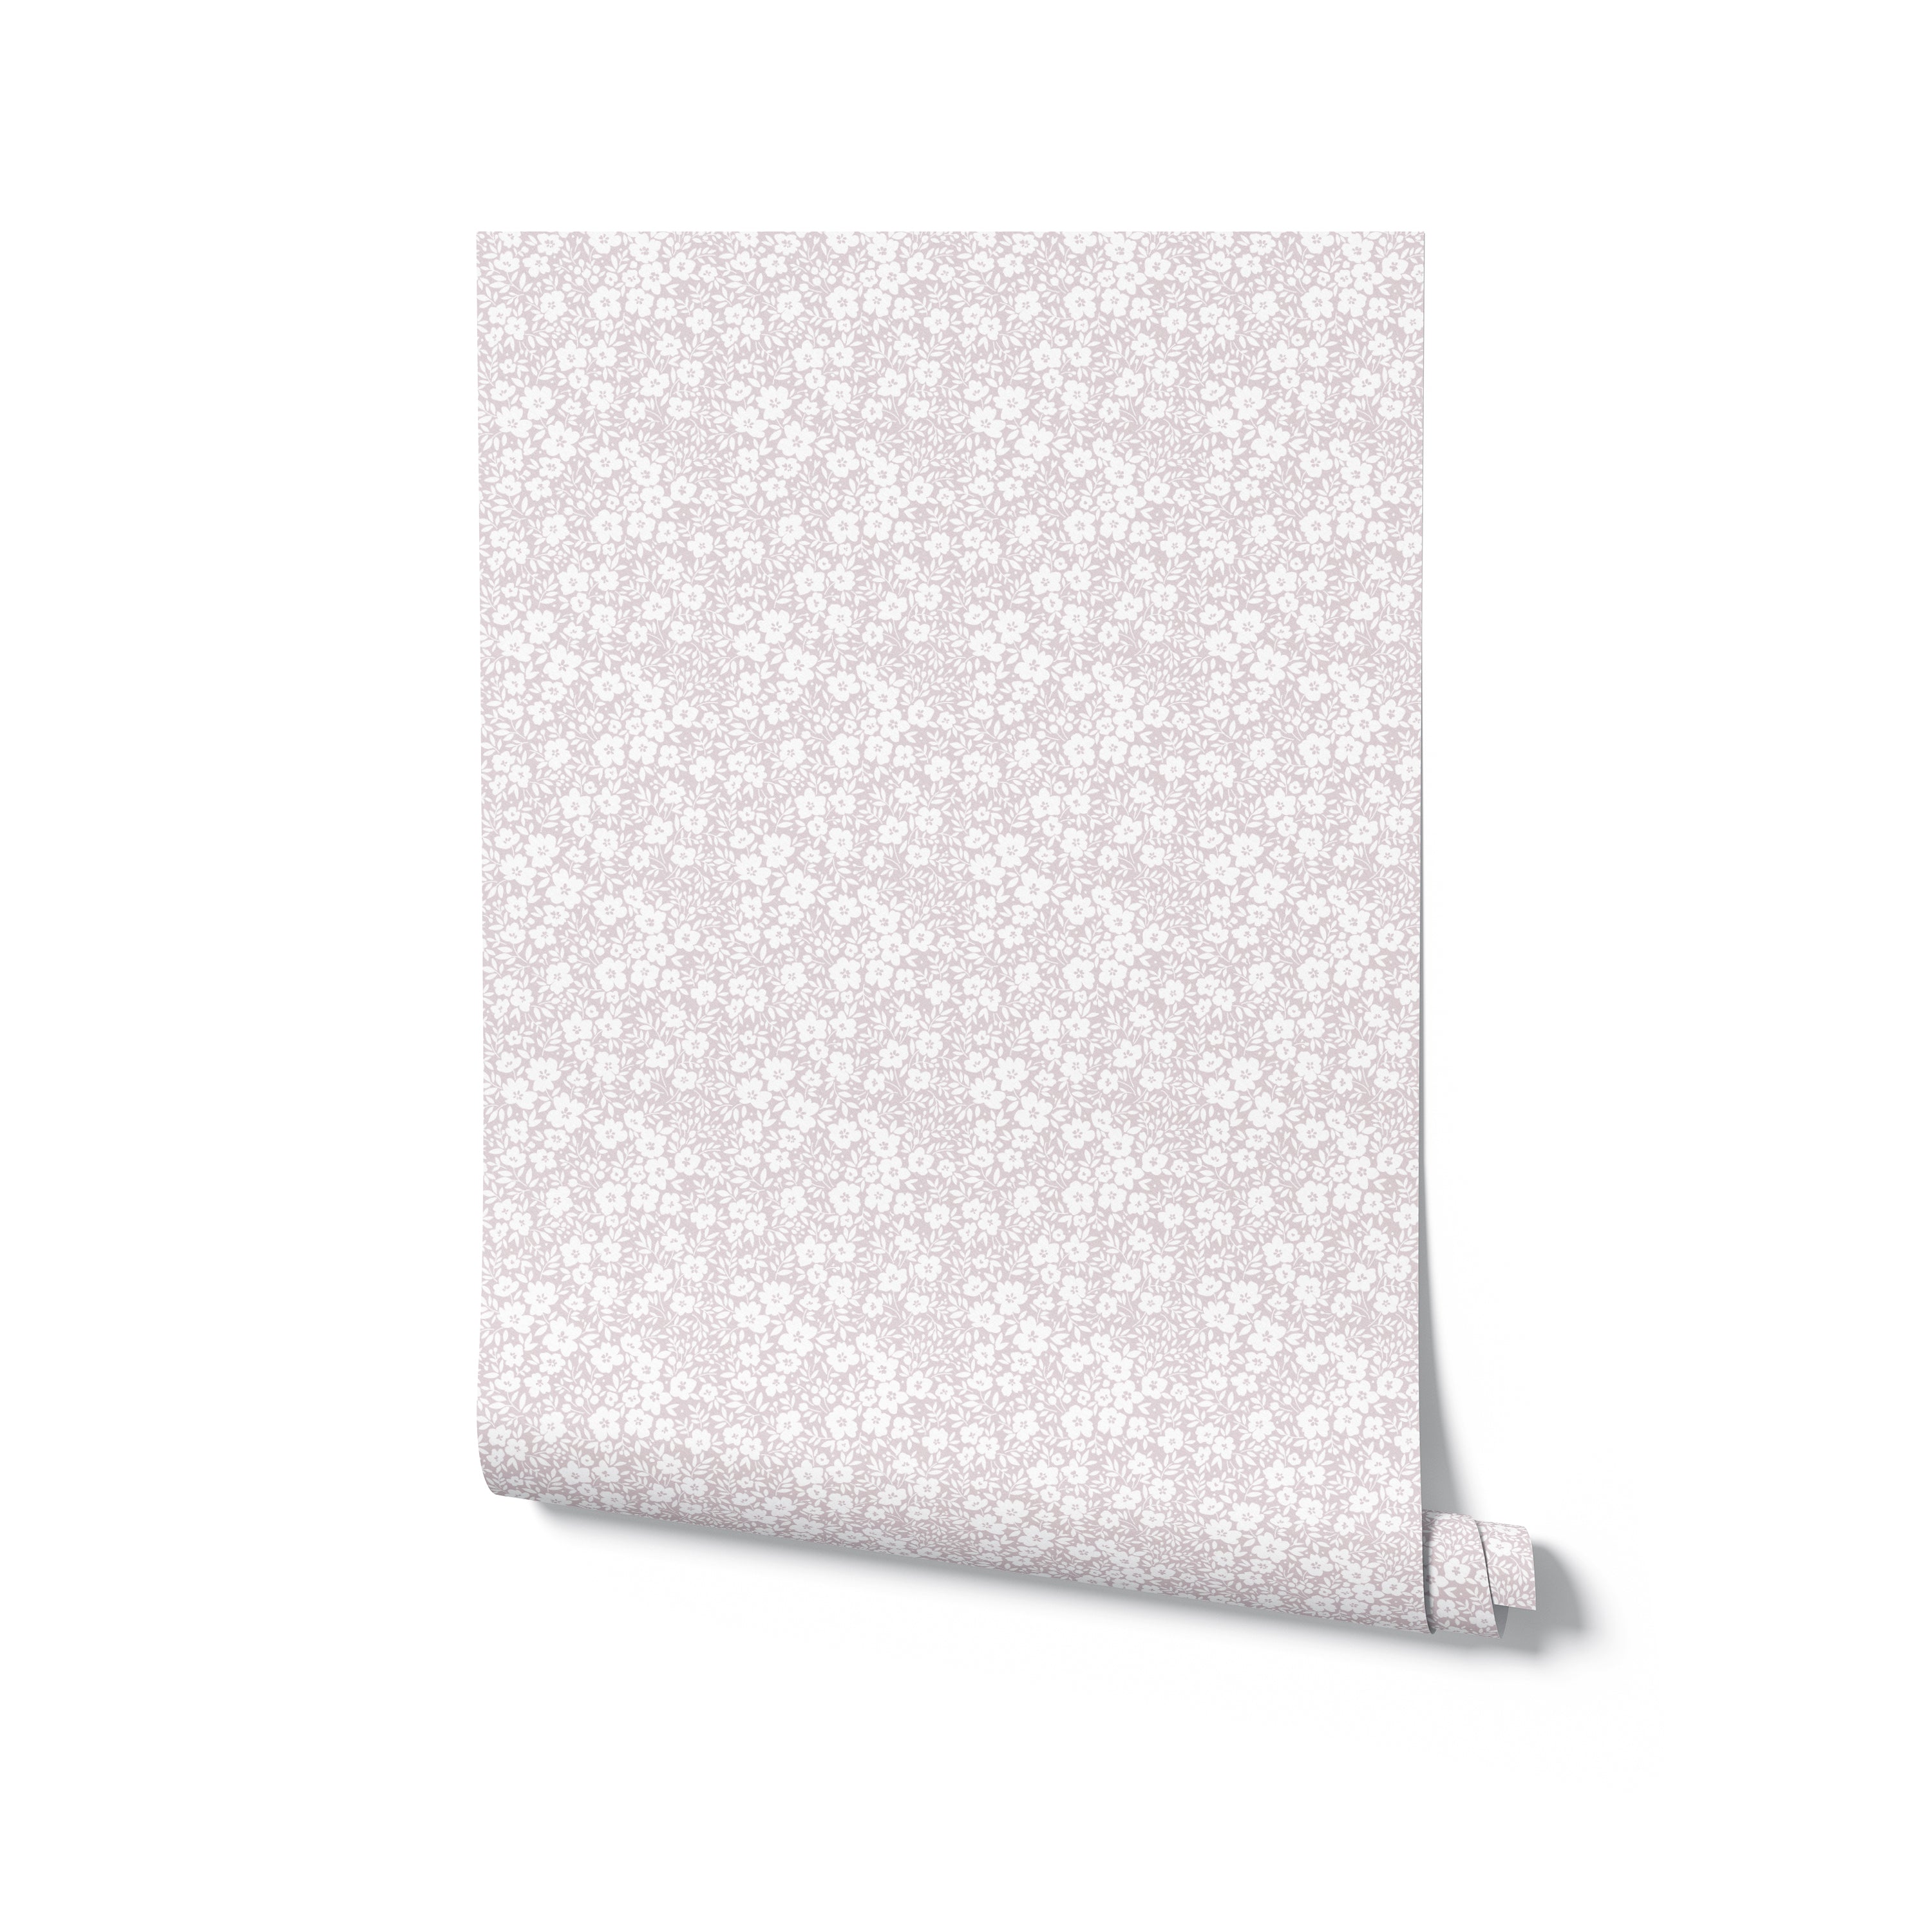 A roll of 'Flower Power' wallpaper featuring a mauve pink background with a small, delicate white floral pattern, displayed standing up with one edge slightly unrolled.